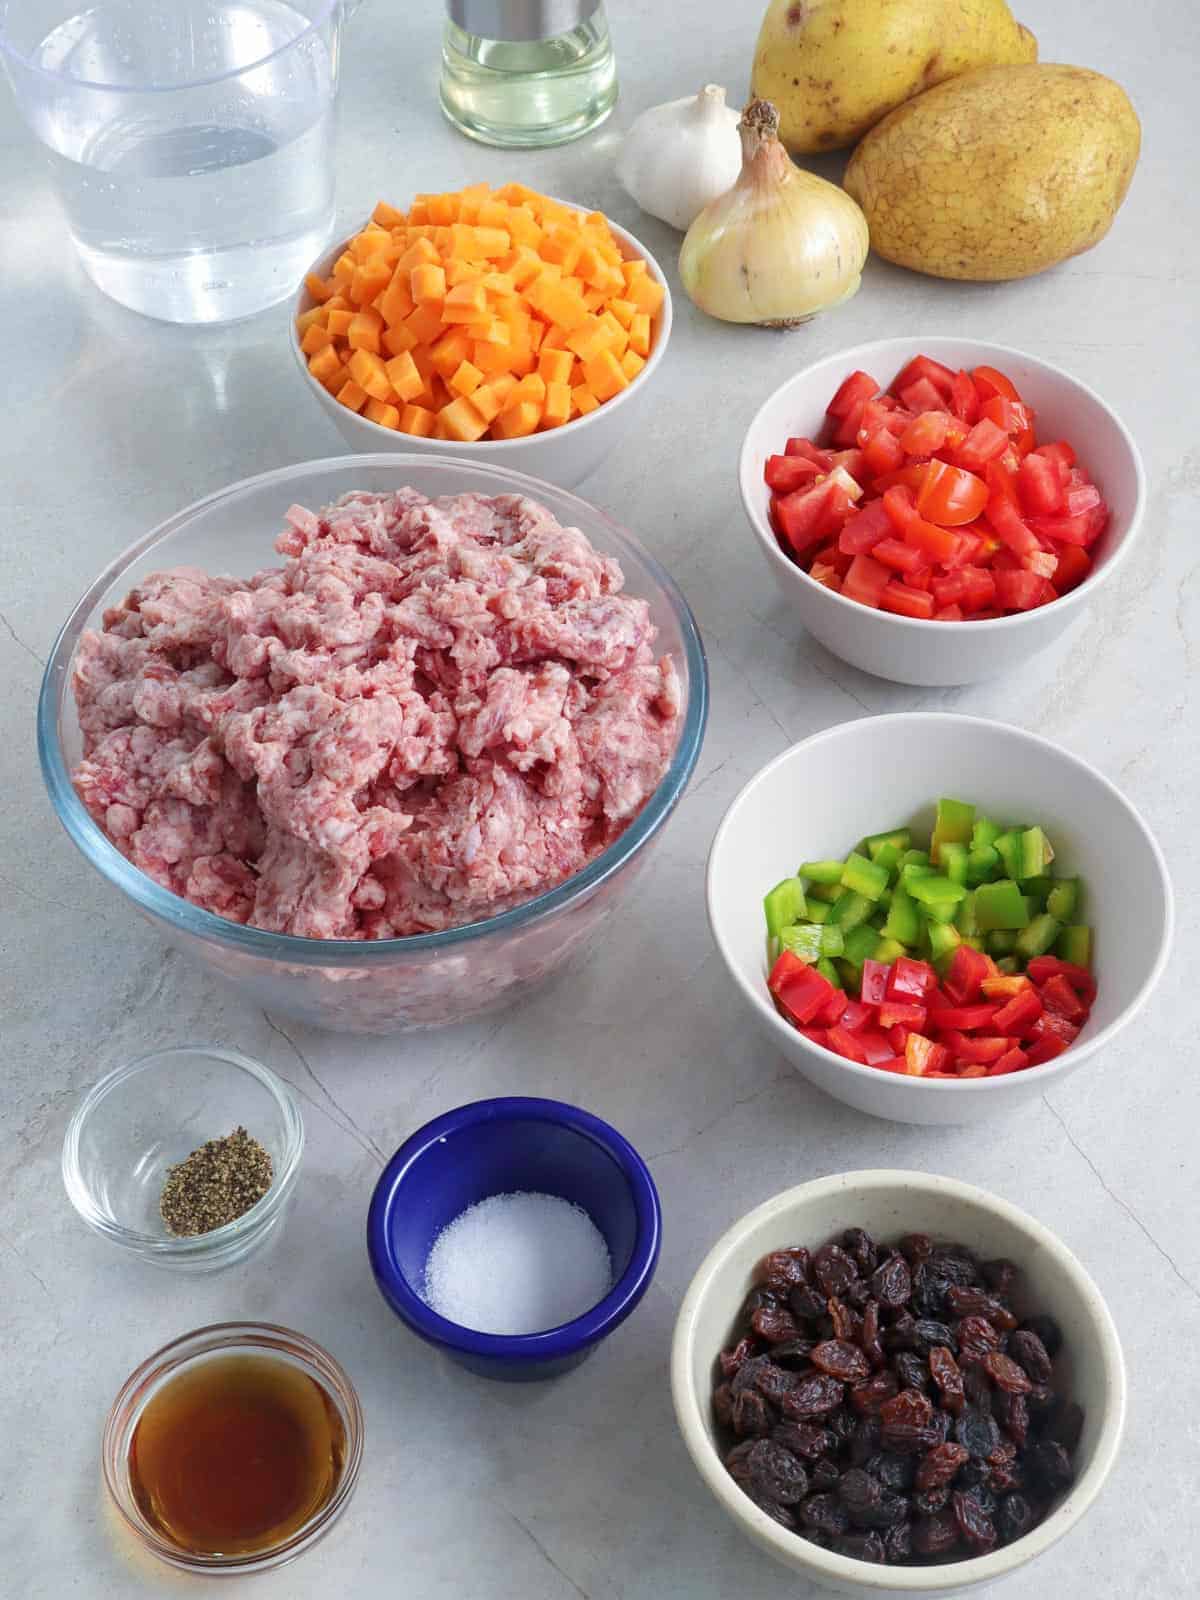 ground pork, diced bell peppers, chopped fresh tomatoes, diced carrots, potatoes, salt, peppers, raisins in individual bowls